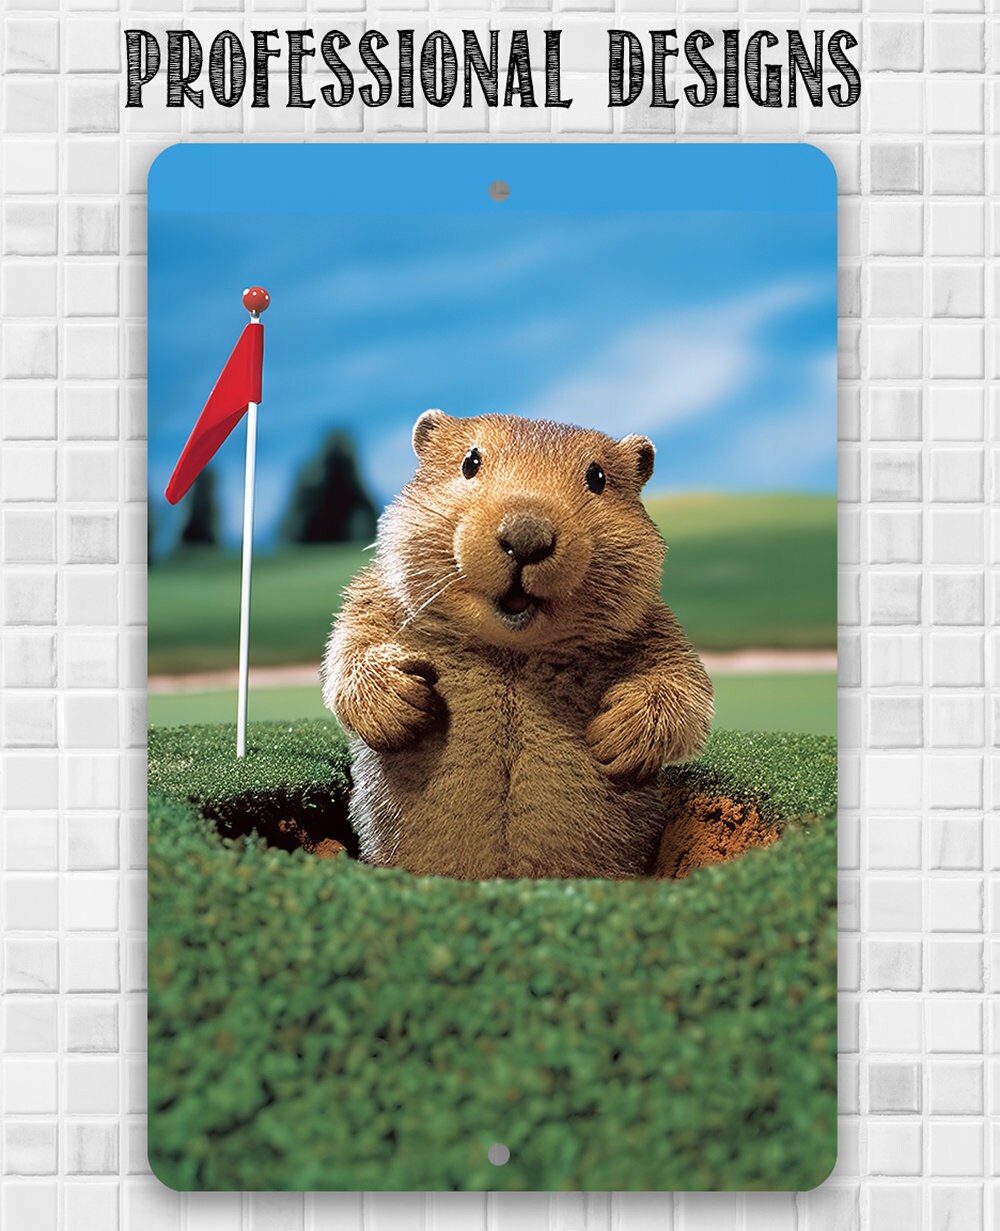 Tin-Metal Sign- Gopher Golf - 8"x12" or 12"x18" Use Indoor/Outdoor - Kid's Playroom, Nursery, Backyard Playground Decor and Baby Shower Gift